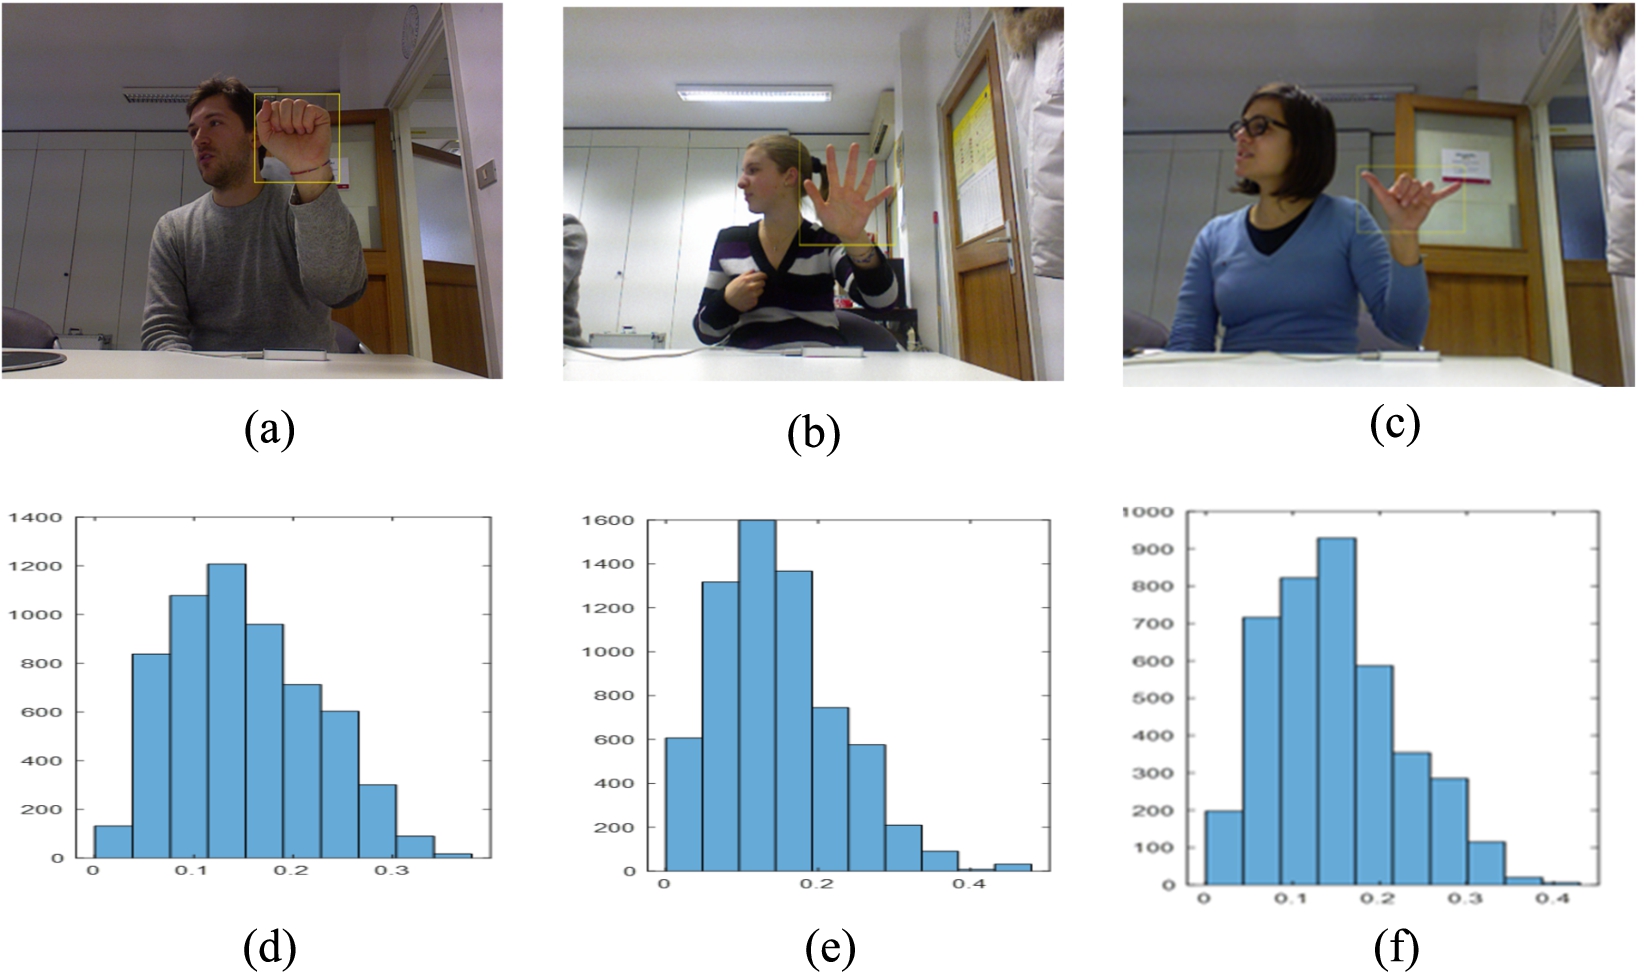 (a), (b) and (c) are the samples of RGB images and (d), (e) and (f) are the corresponding histograms.